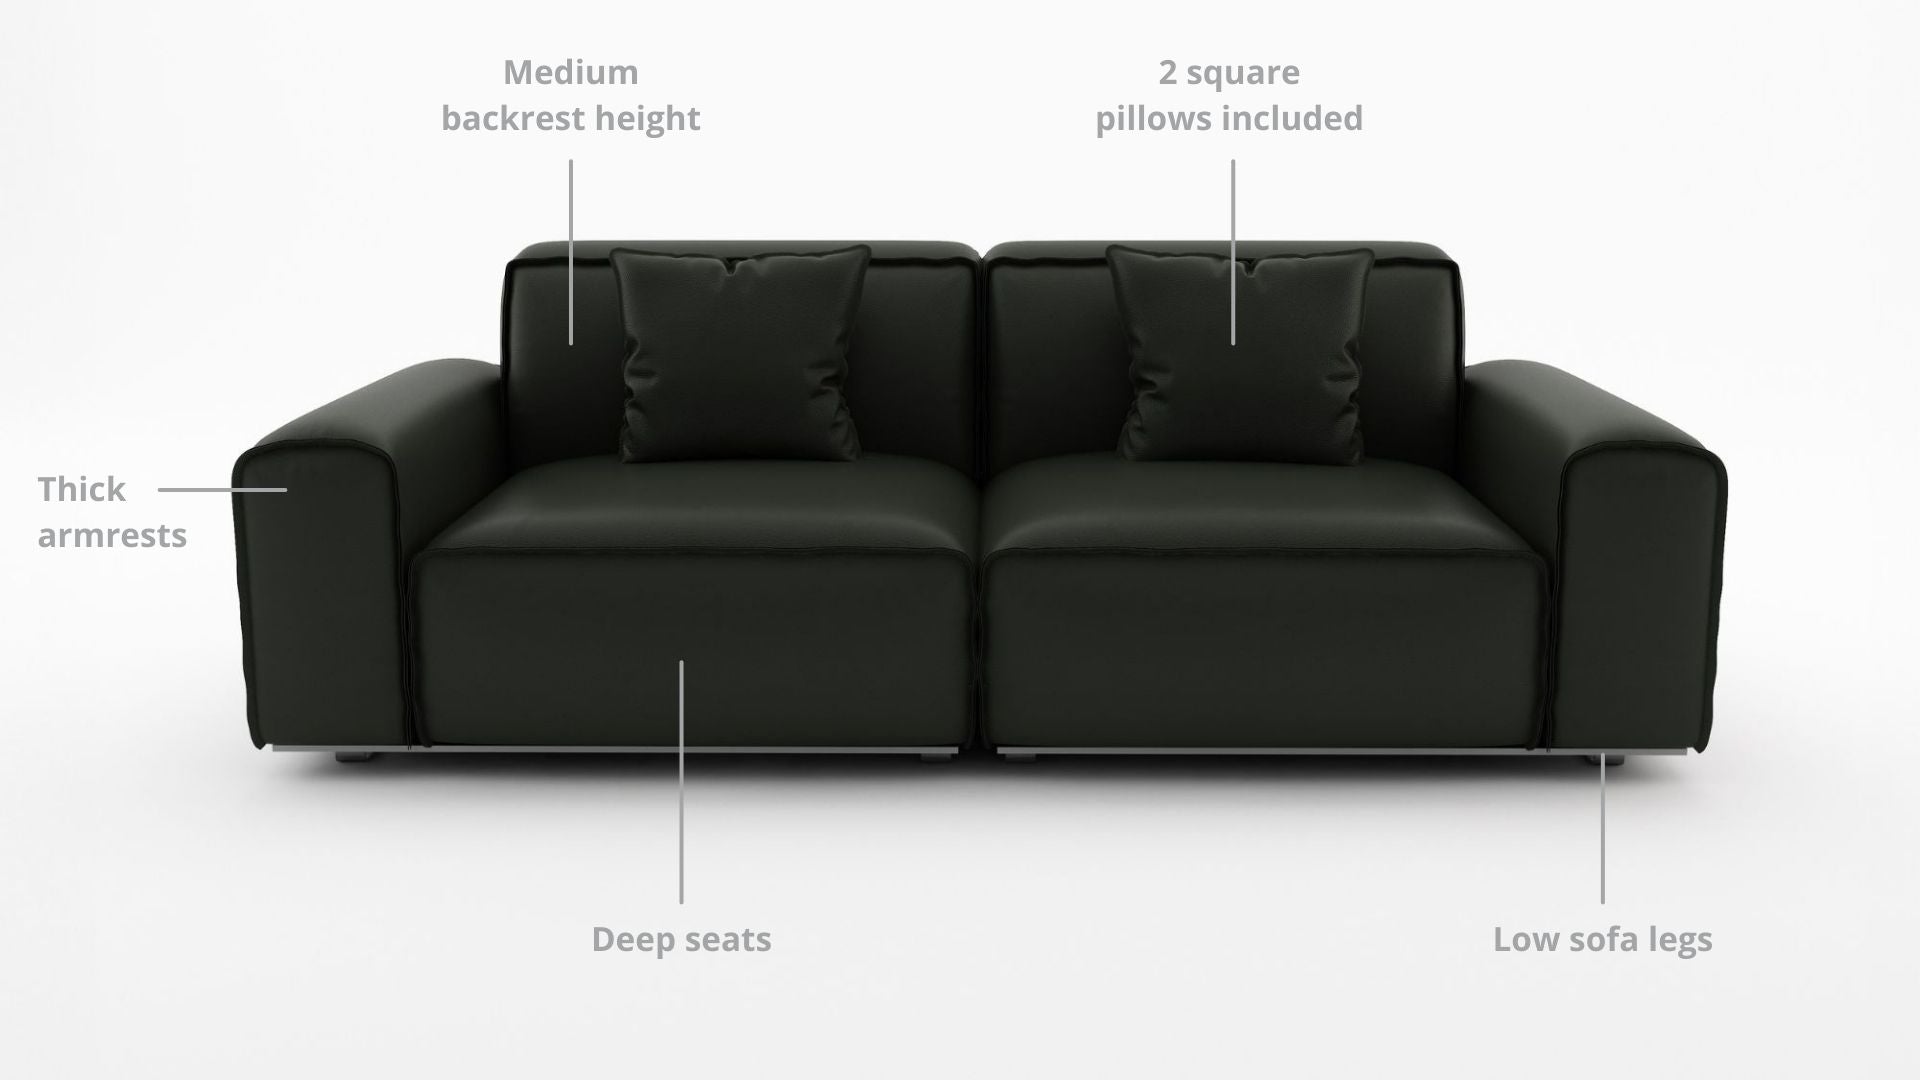 Key features such as armrest thickness, cushion height, seat depth and sofa leg height for Colby Half Leather Sofa